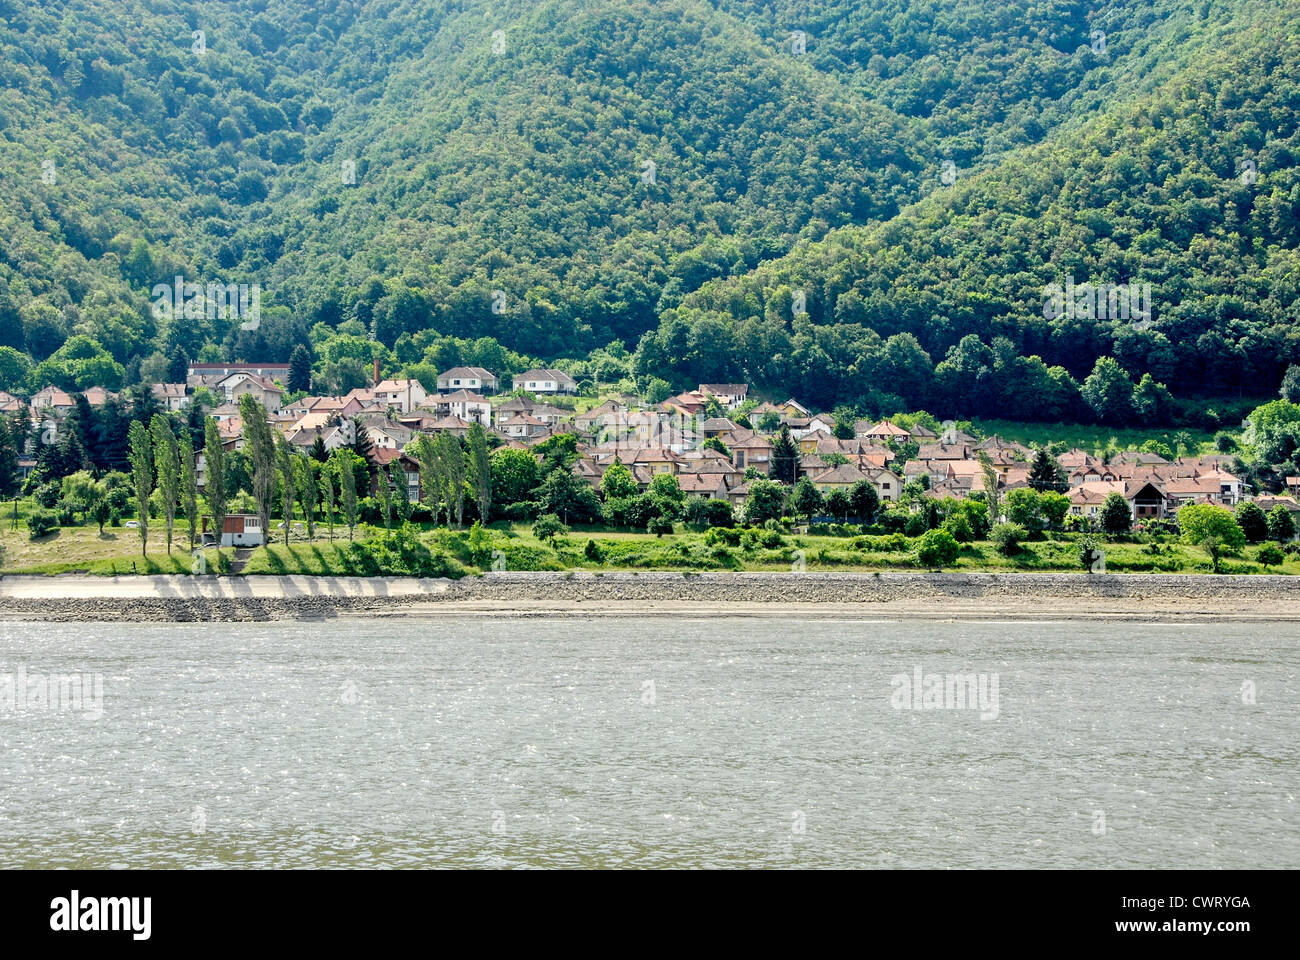 Serbian village in the Iron Gates gorge on the Danube River between Romania and Serbia Stock Photo